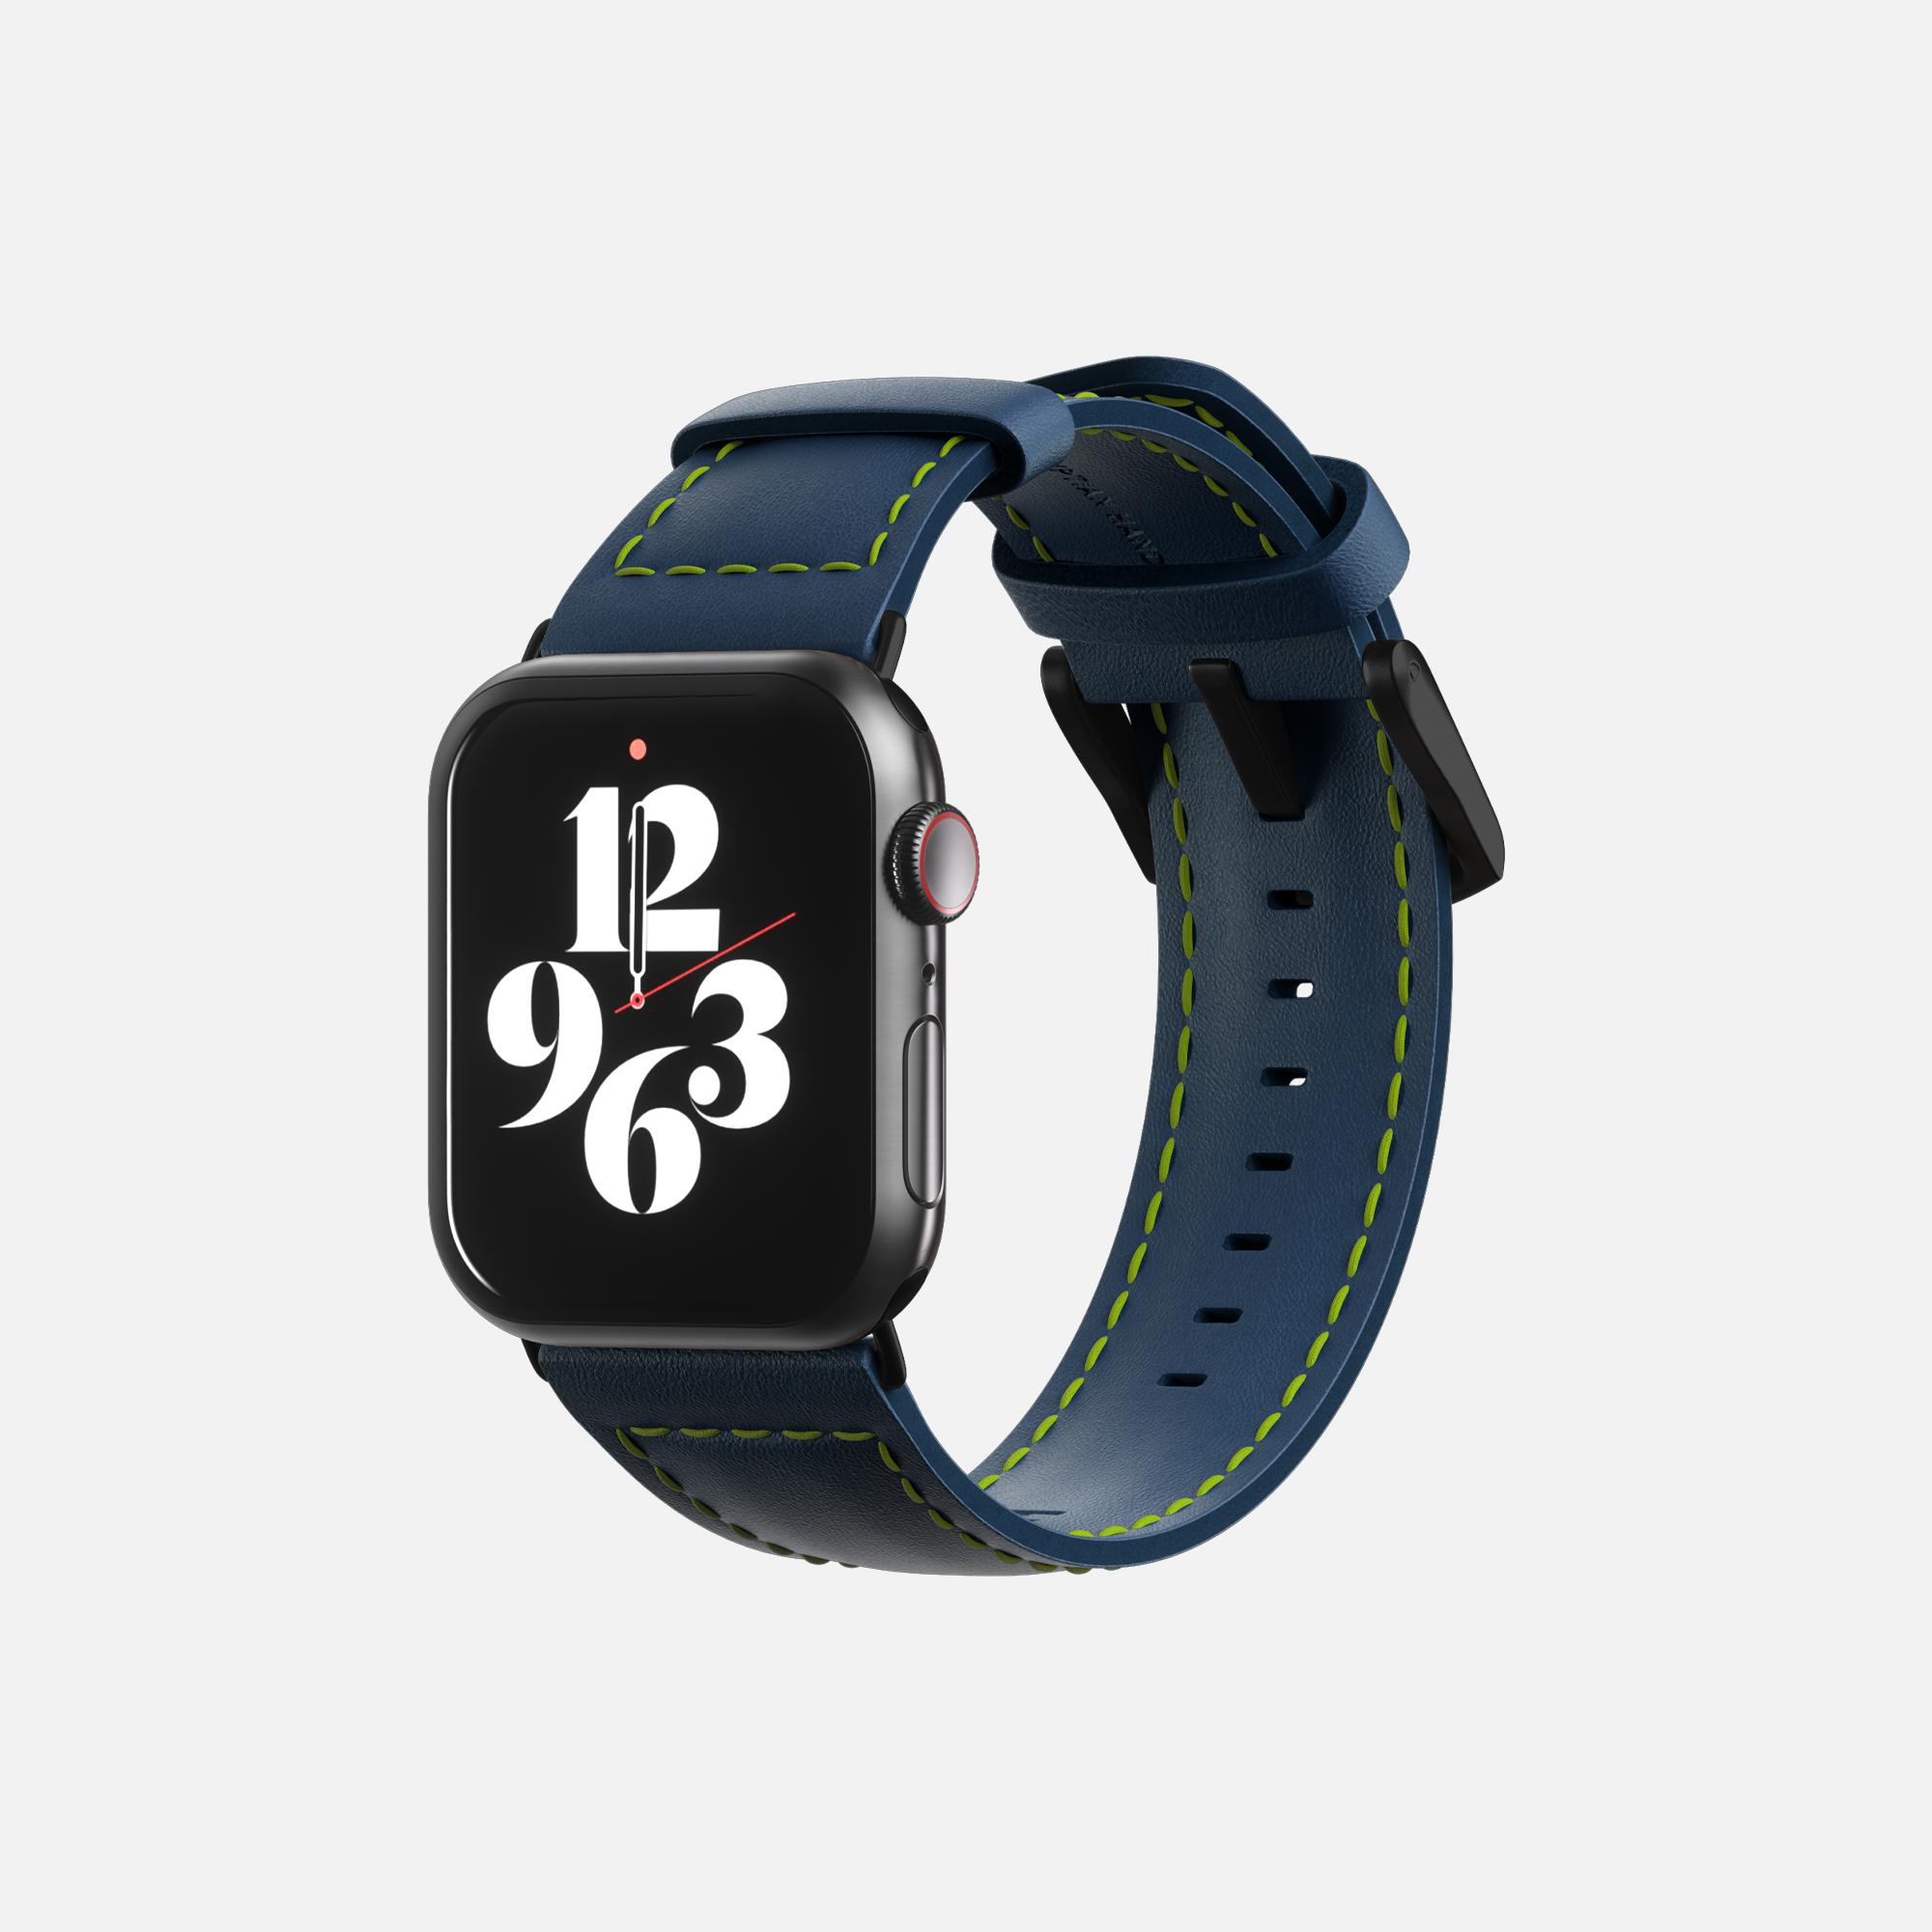 Apple Smartwatch with blue strap, green stitching, and customizable face display.